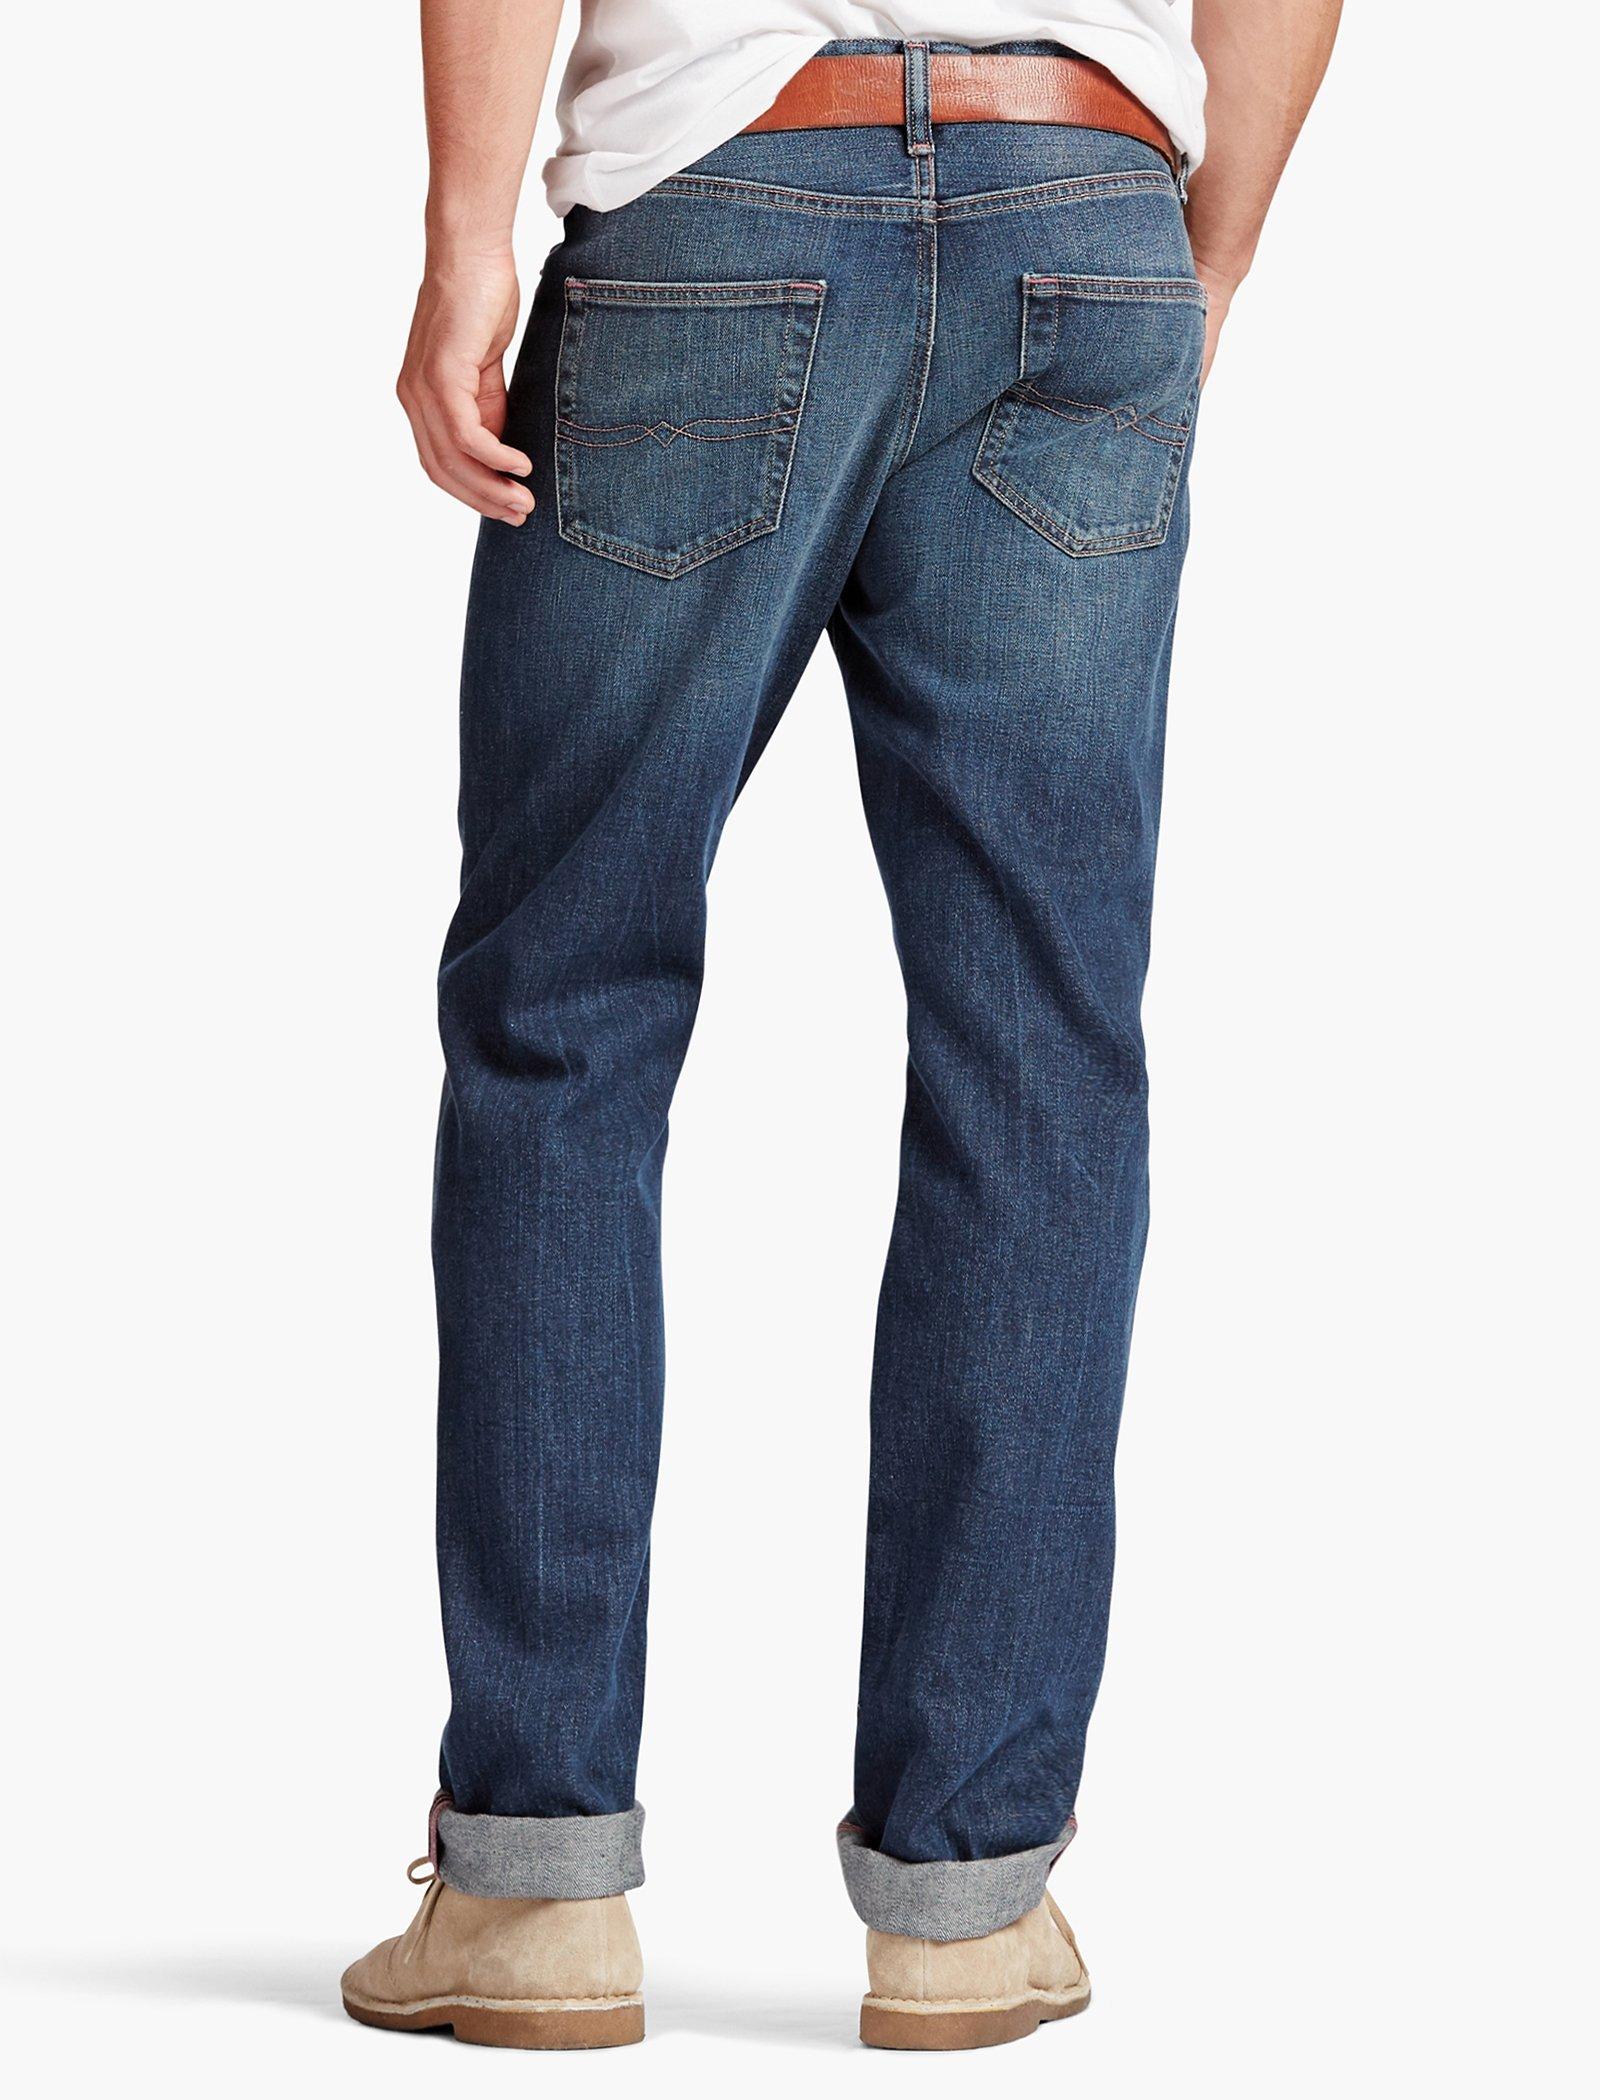 Lucky Brand Men's 410 Athletic Fit Jean Novato NWT MSRP $89 (EEE)